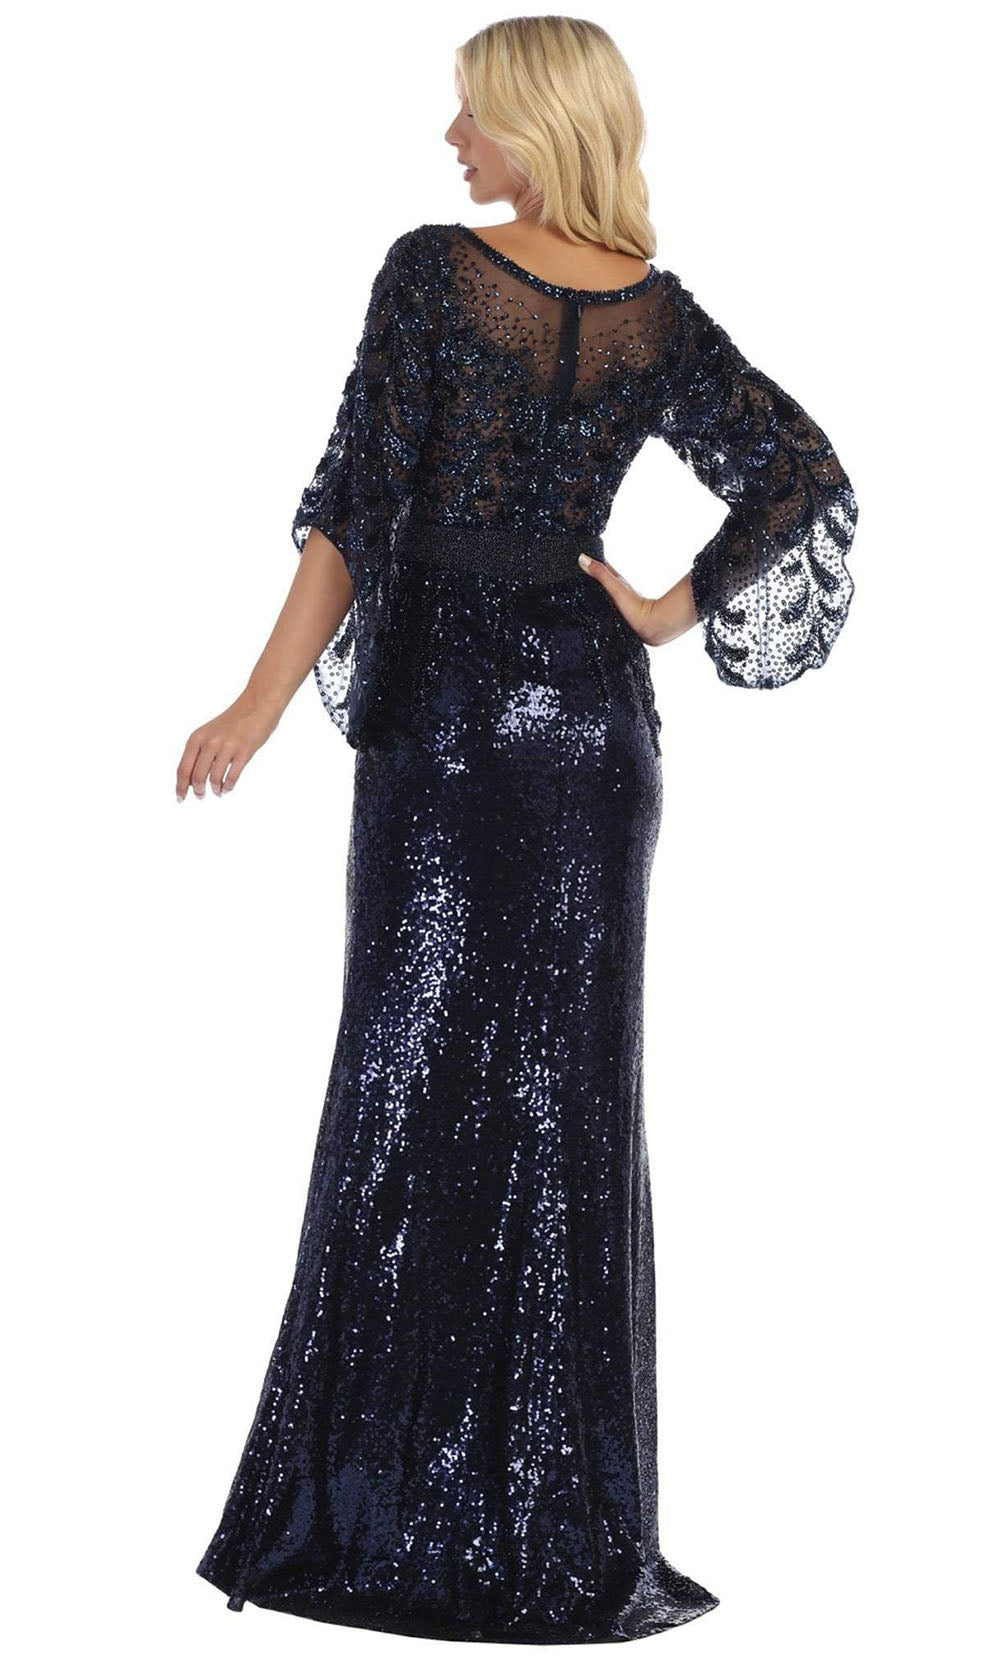 May Queen - RQ7679 Embellished Bateau Sheath Gown In Blue